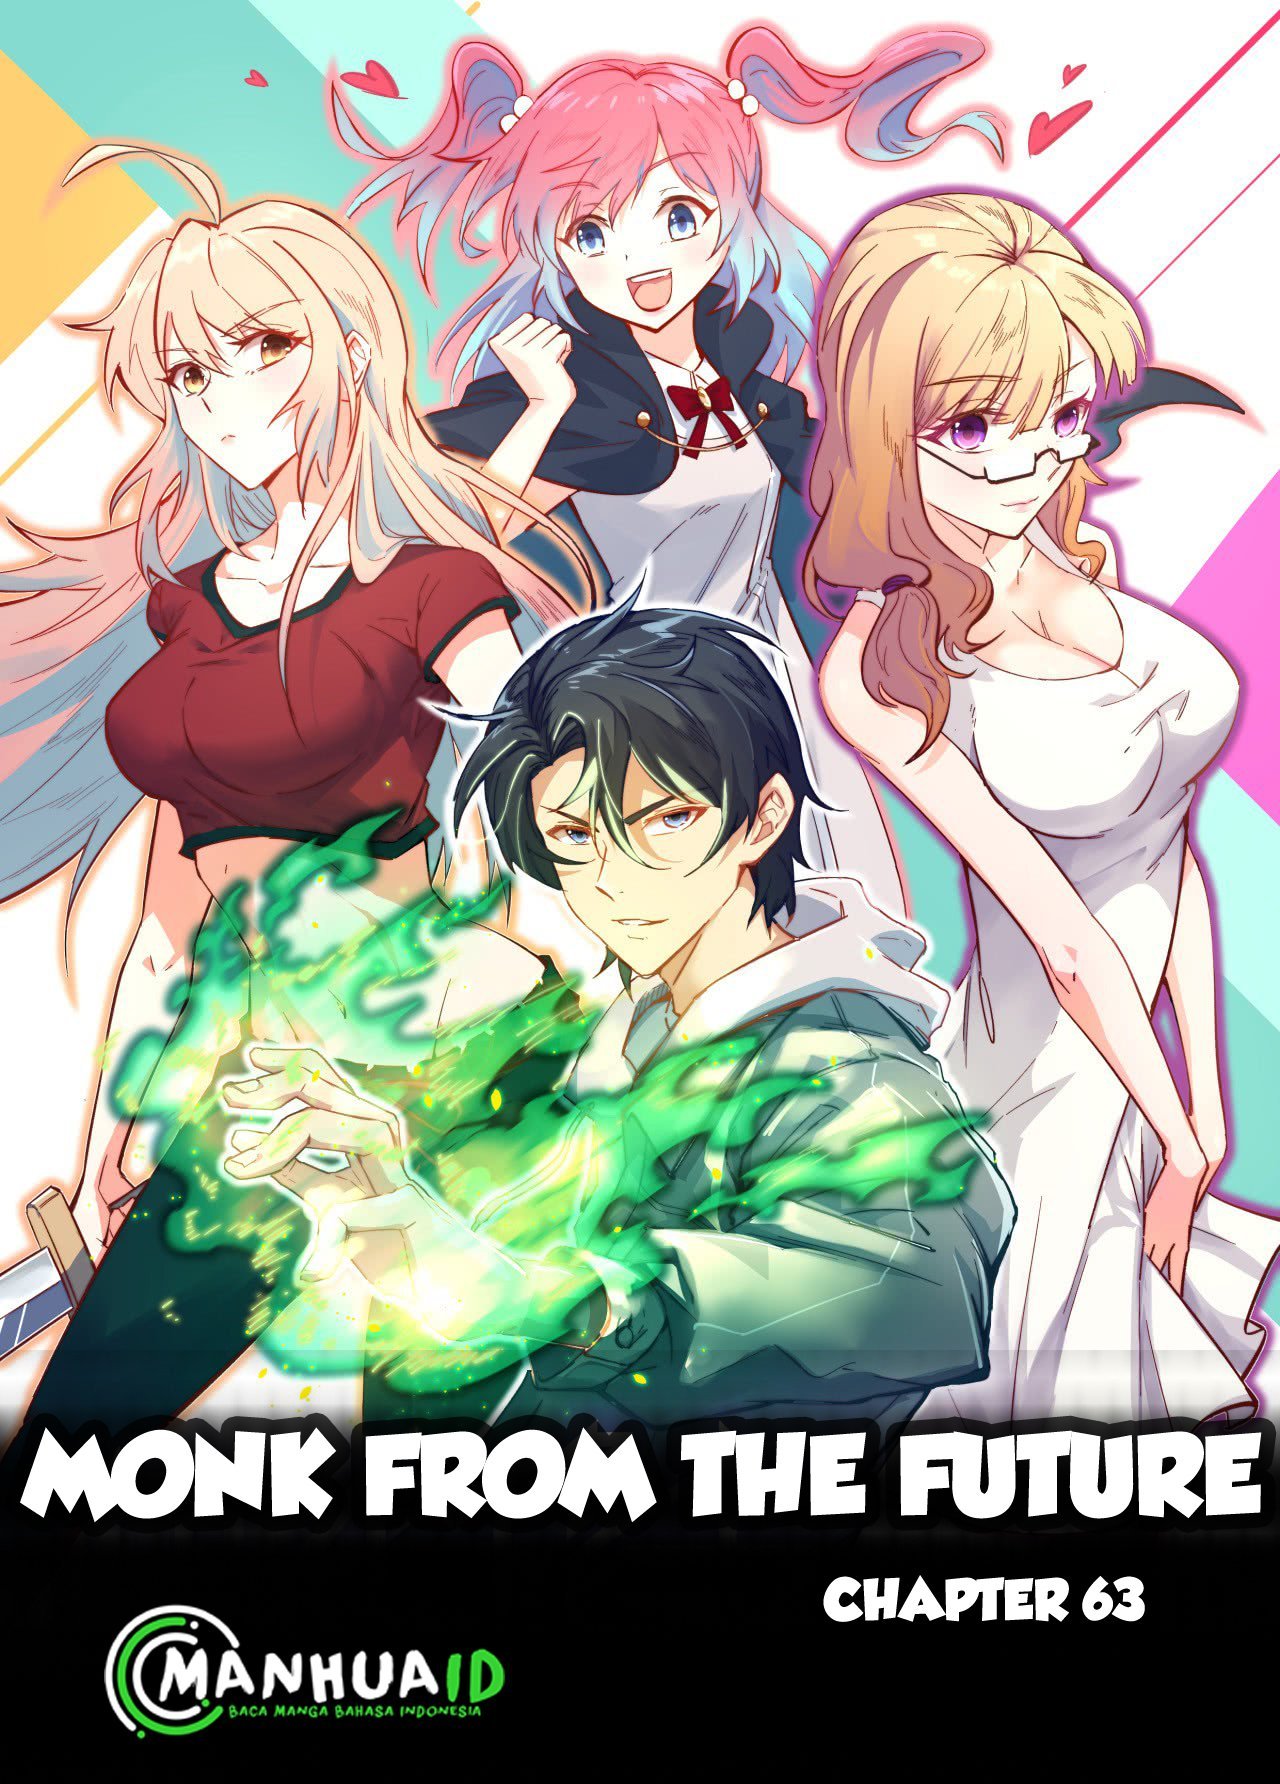 Monk From the Future Chapter 63